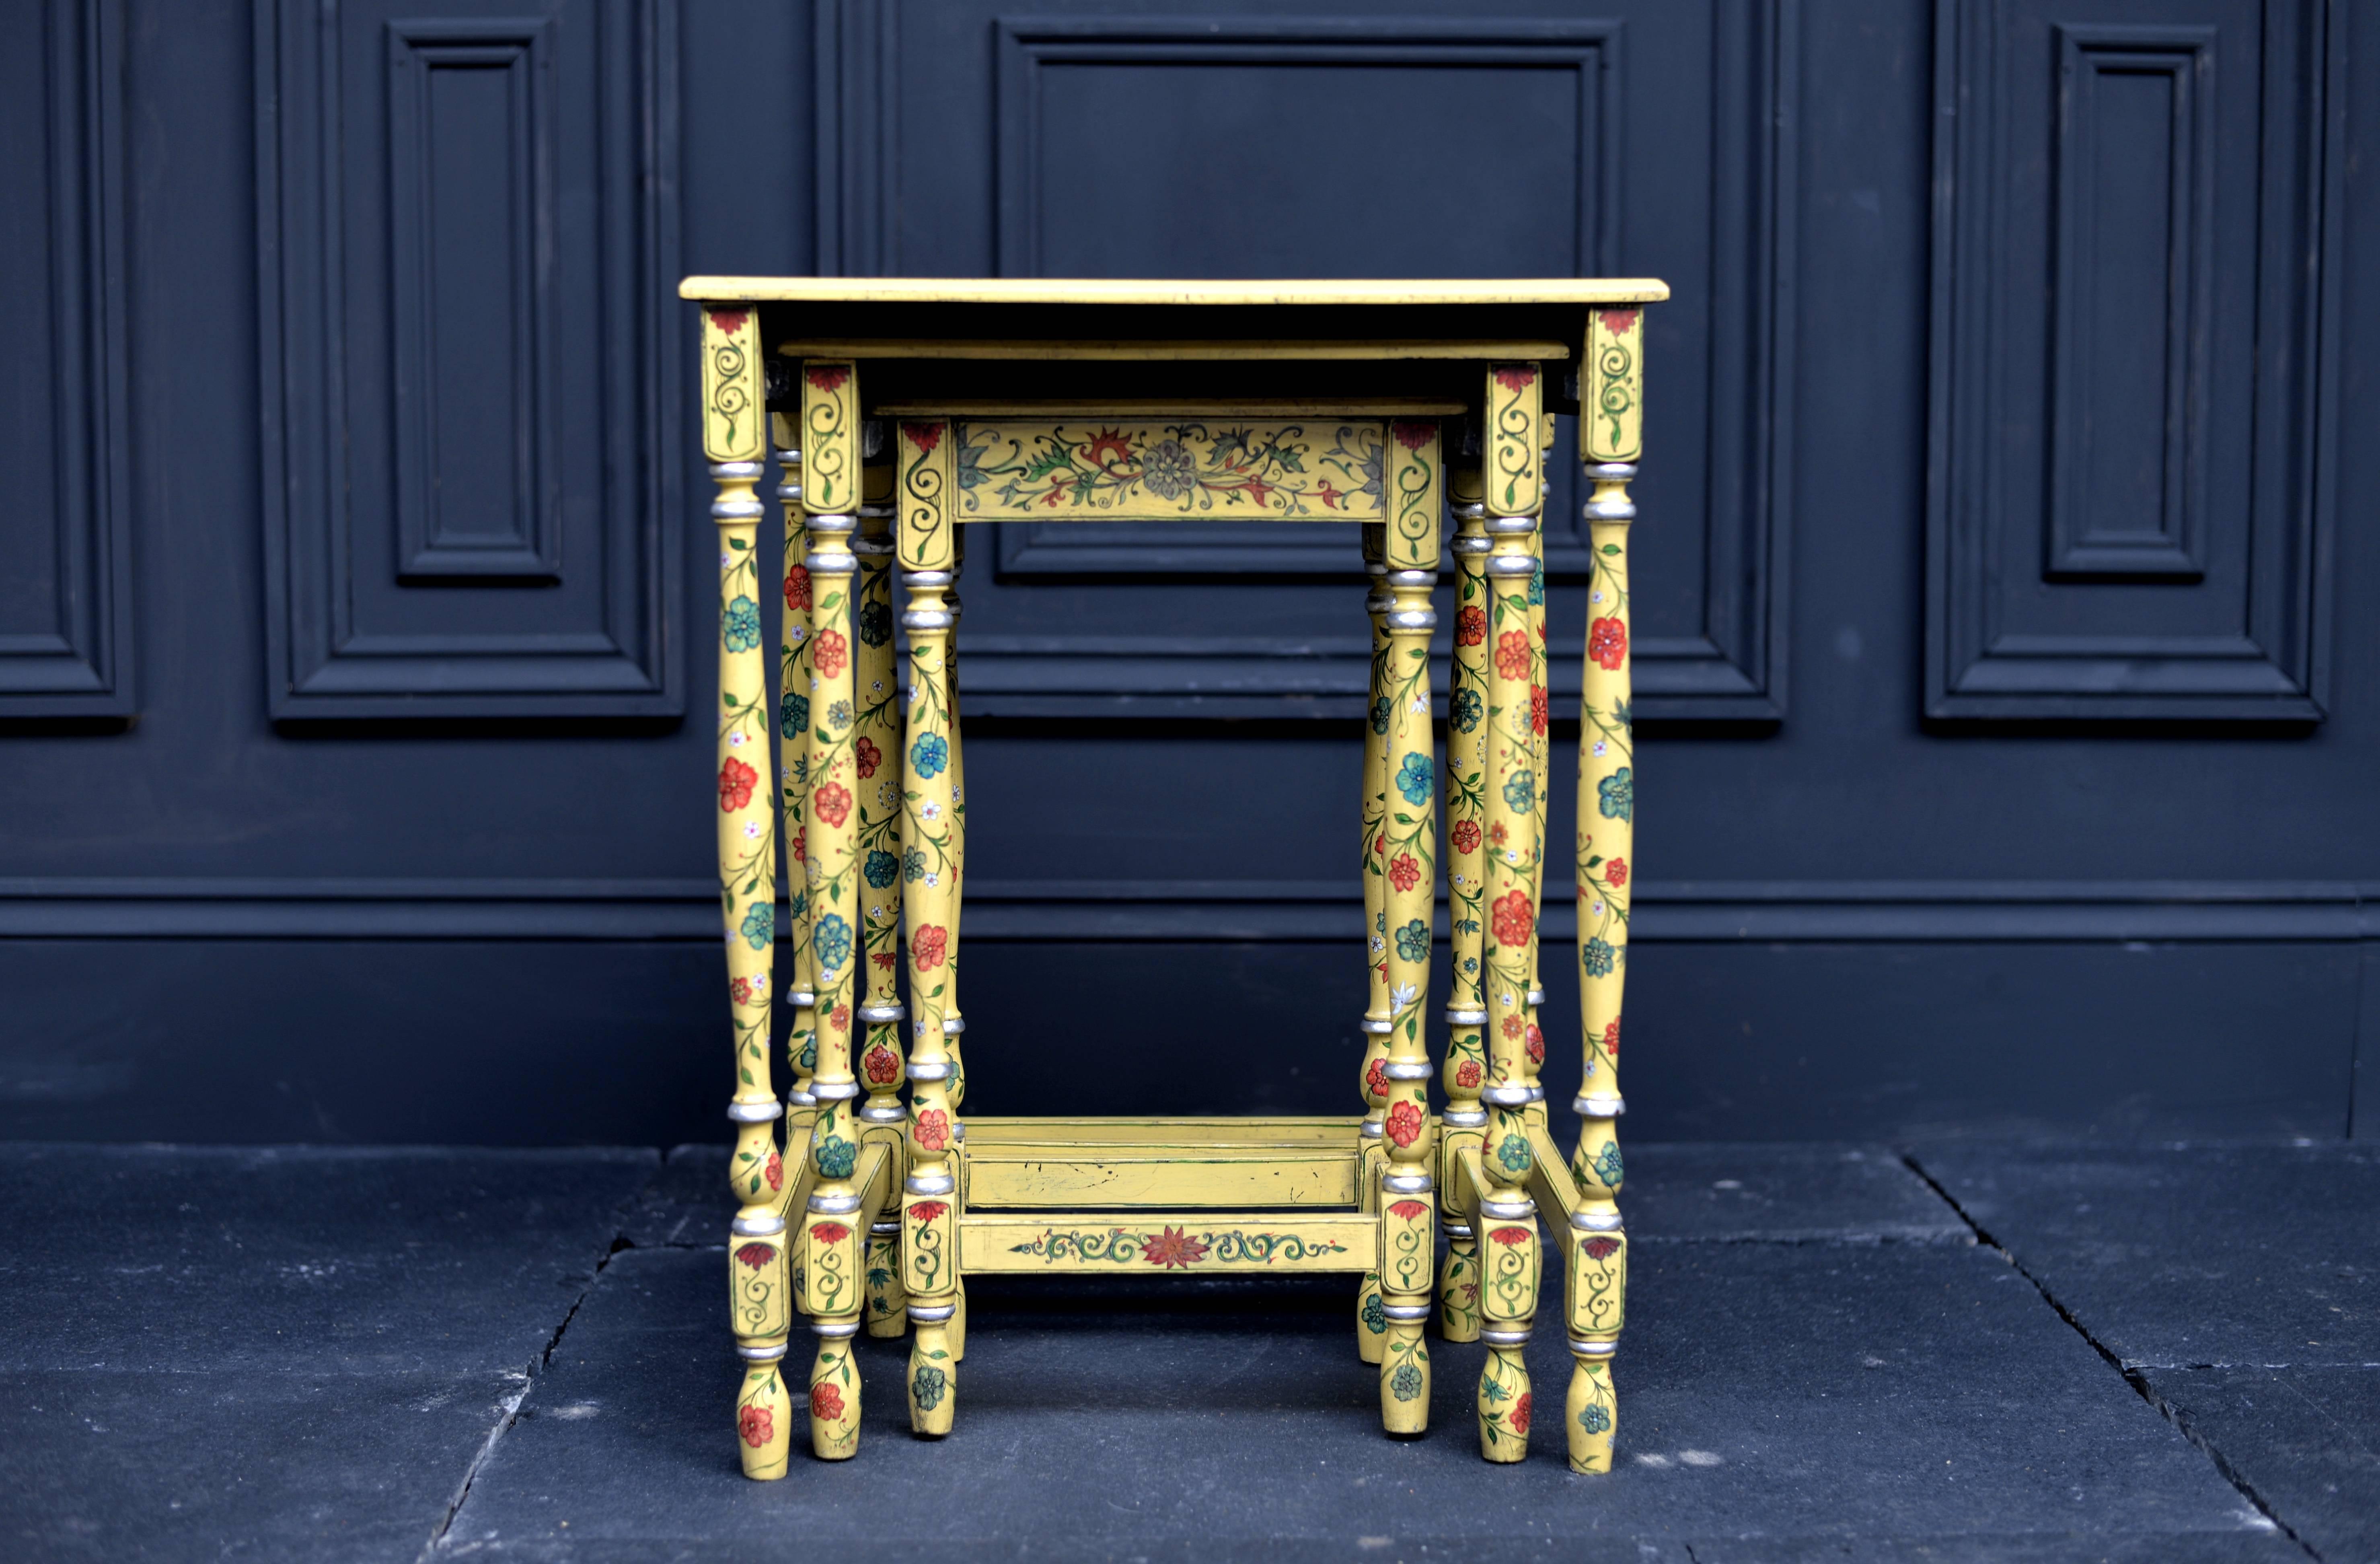 This is a rare antique nest of three occasional tables dating to circa 1890. With a Japanned finish of exquisite yellow tones, each table is beautifully decorated with a different scene on the top surfaces and floral decoration to the turned legs.